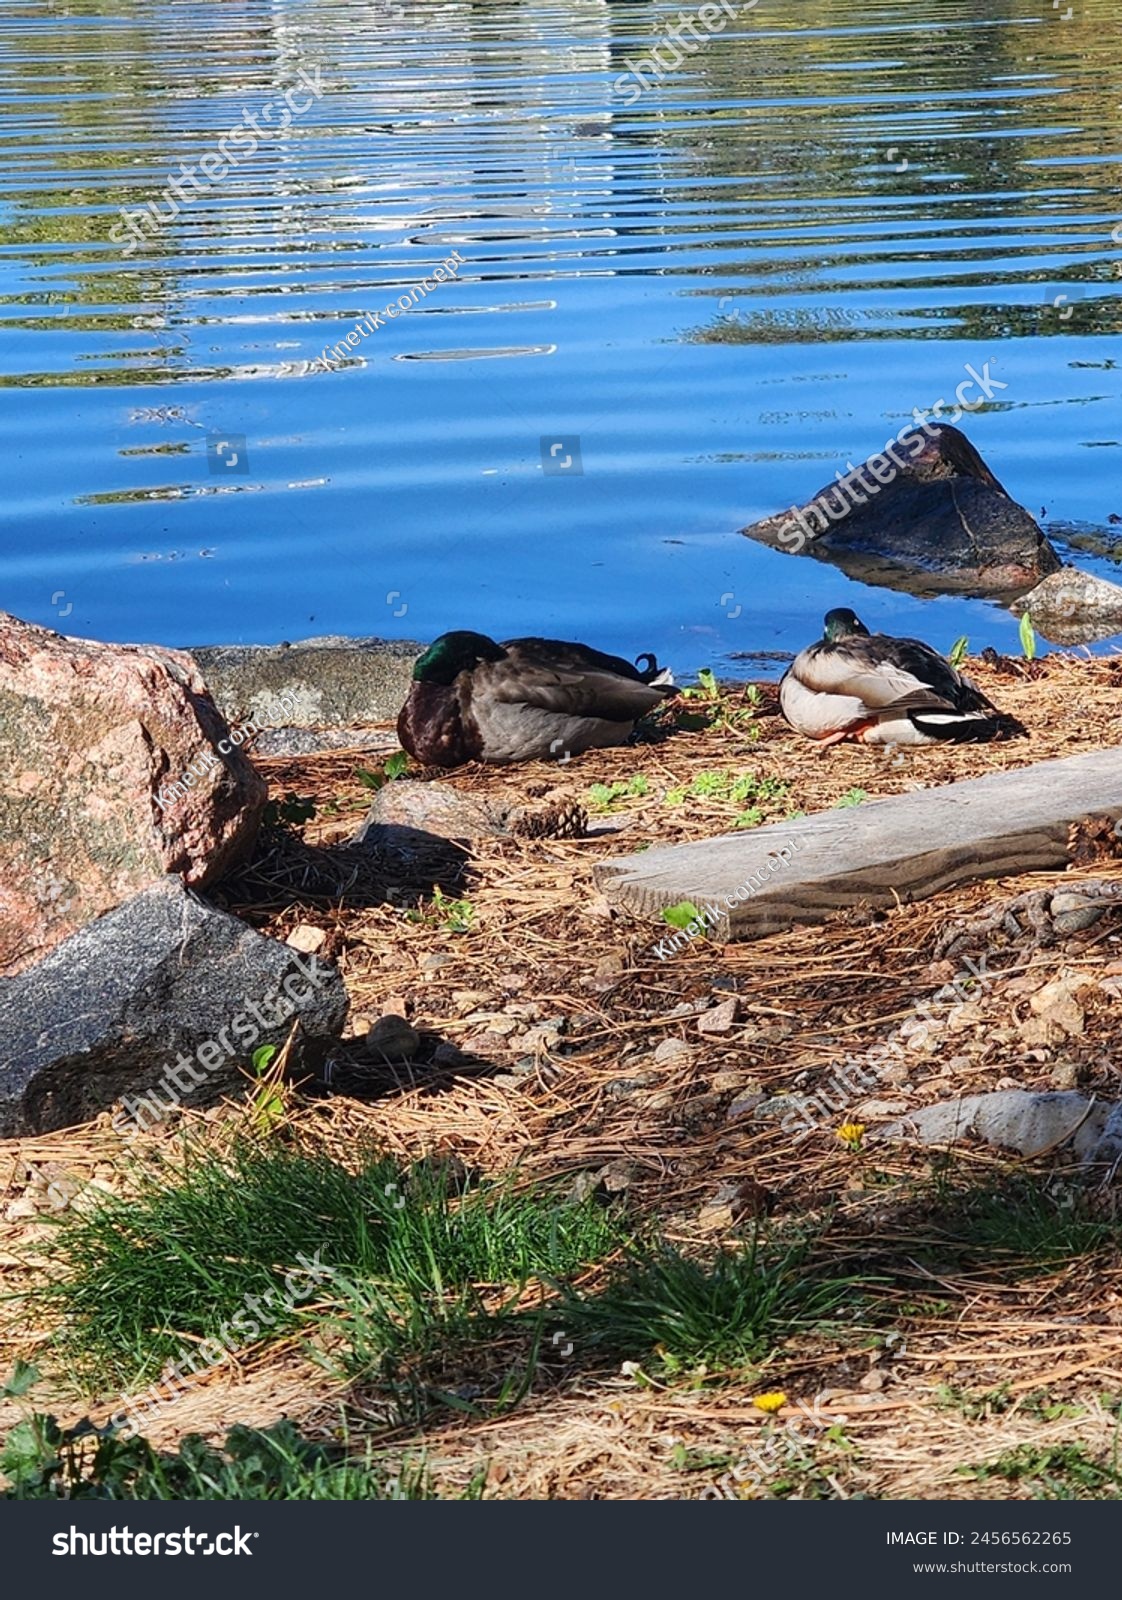 Two ducks peacefully napping on a serene lakeshore, surrounded by rocks and gentle morning light, capturing a tranquil moment in nature. Ideal for depicting wildlife and calm environments. #2456562265